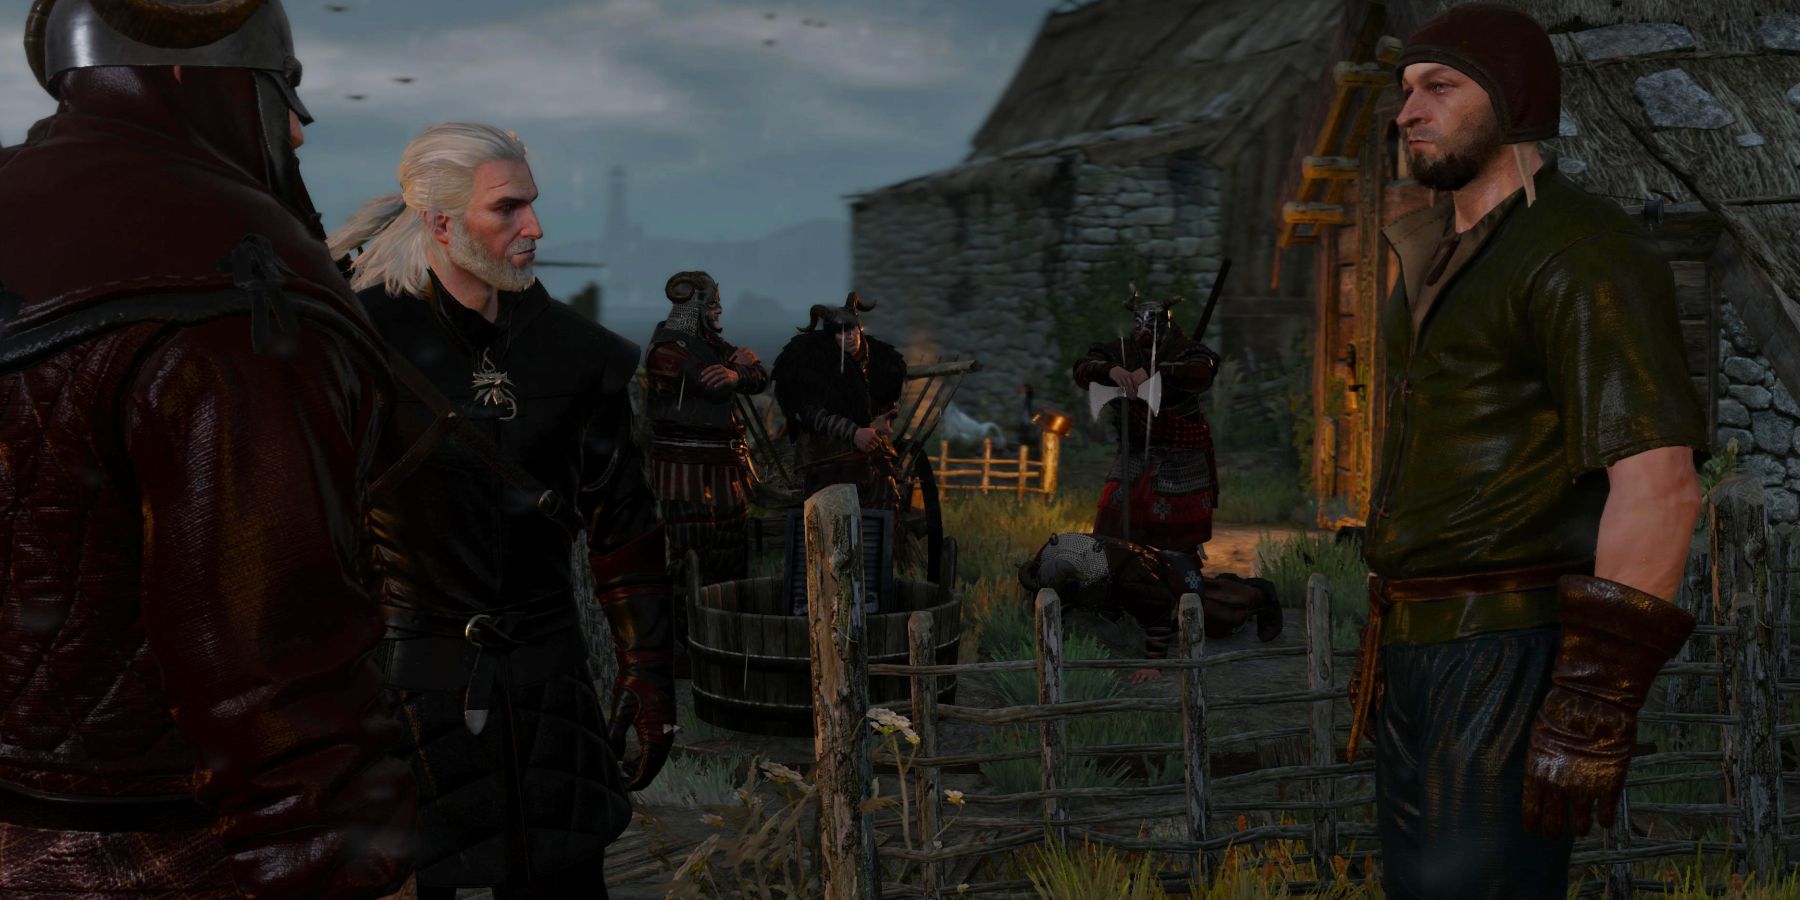 Witcher 3 Geralt getting info from the villager in Fyresdal